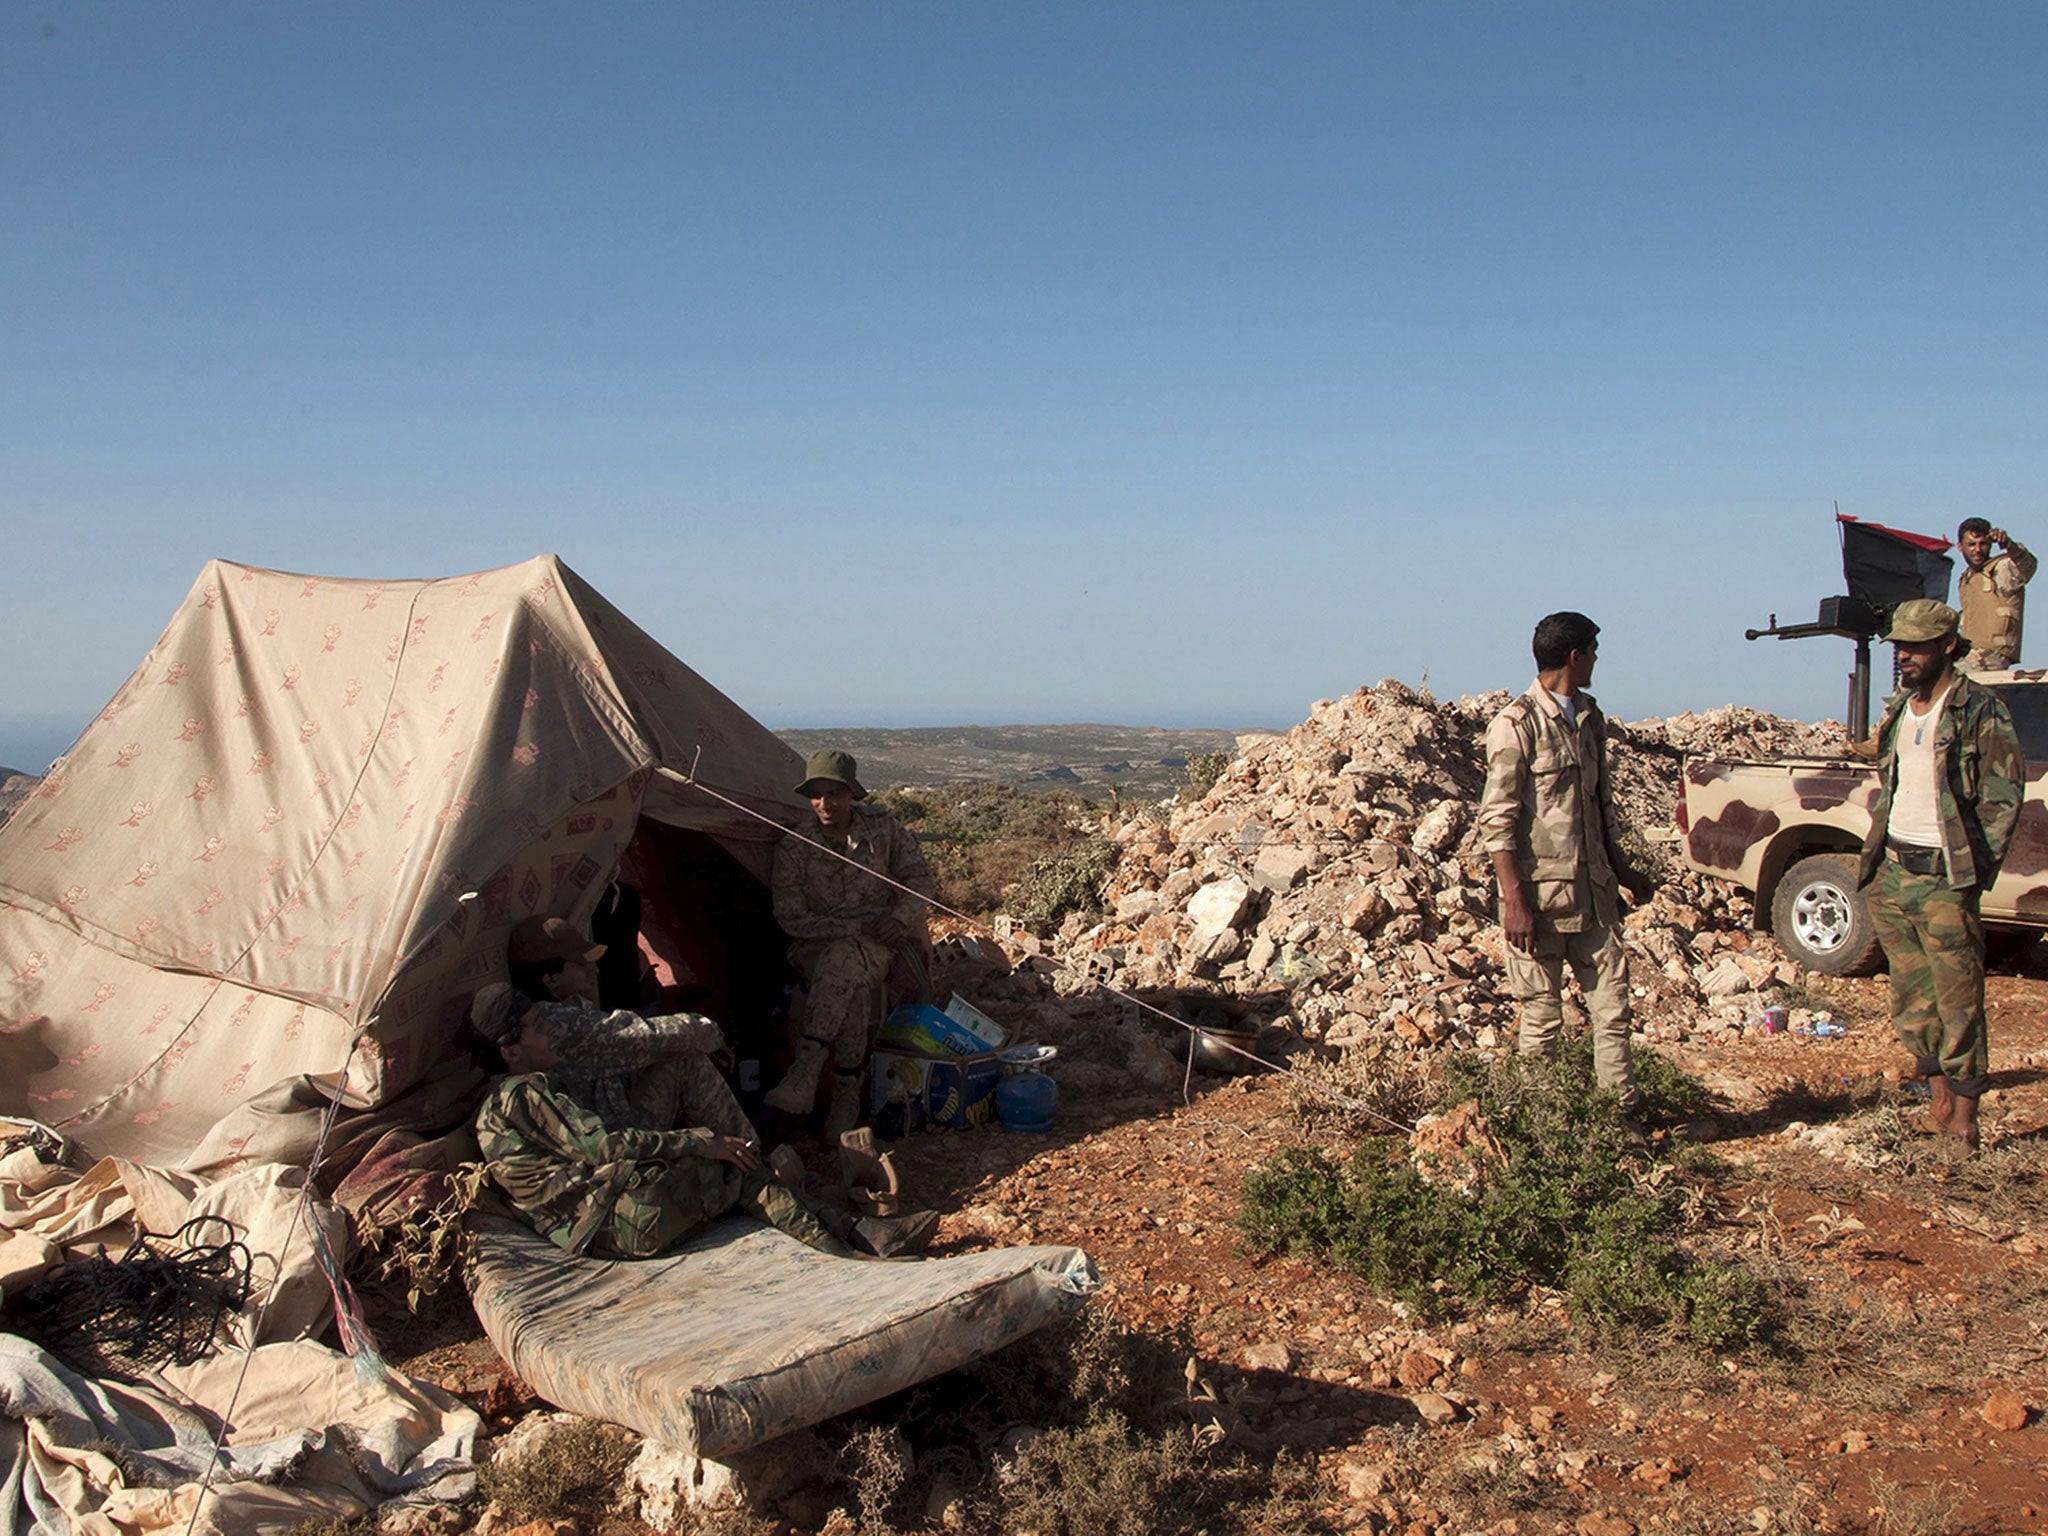 Members of the Libyan pro-government forces, stand near their tent during their deployment in the Lamluda area, southwest of the city of Derna, Libya June 16, 2015